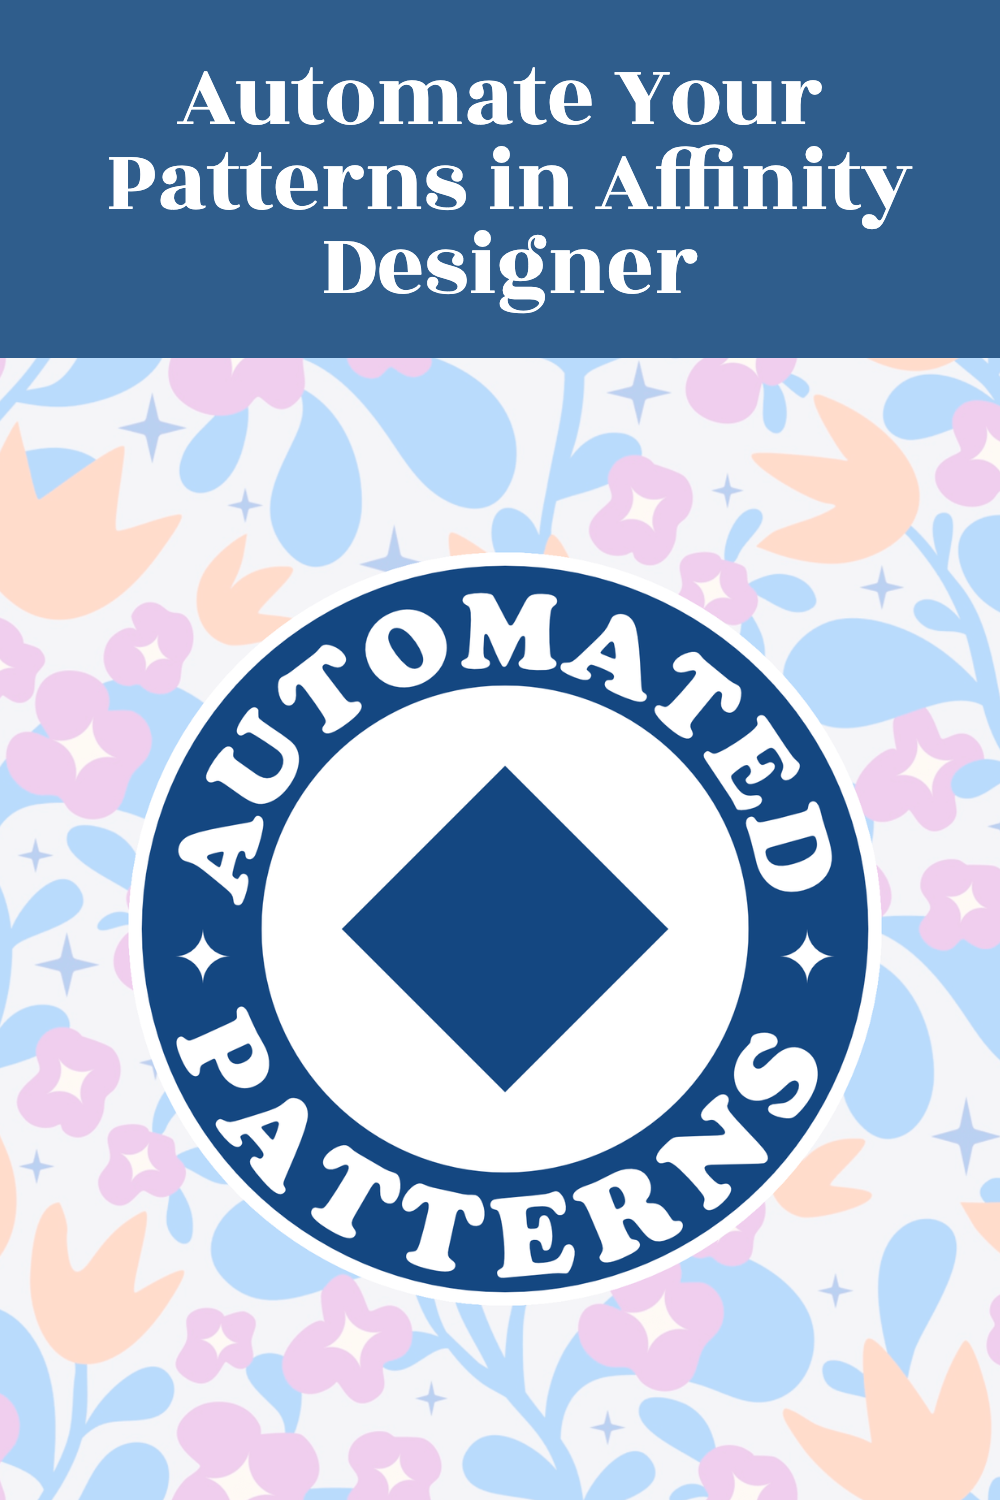 automate-your-patterns-in-affinity-designer-pin.png